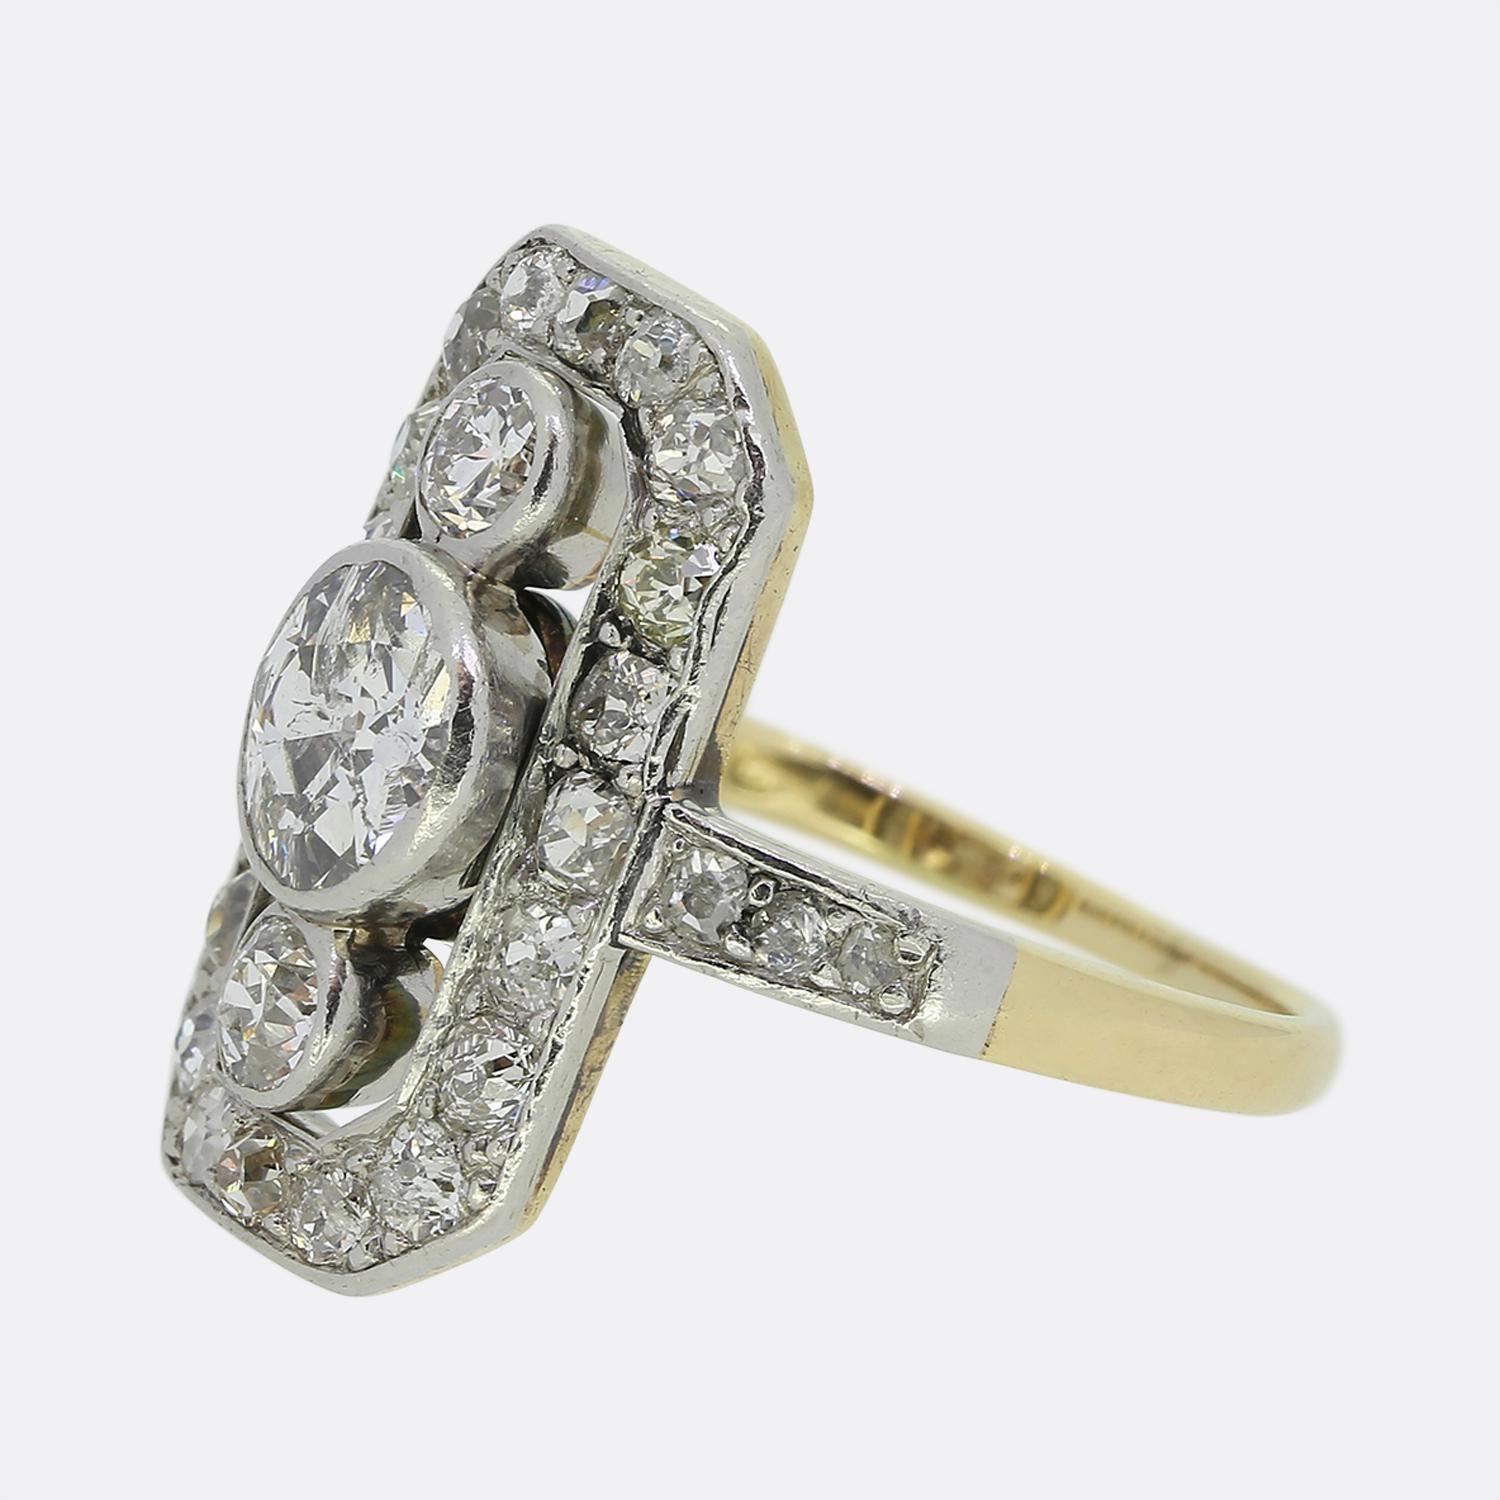 Here we have a lovely diamond tablet ring dating back to the Edwardian period. A single sizeable old cut diamond sits risen at the centre of an open face and is top and tailed by a slightly smaller matching stone above and below. These principal